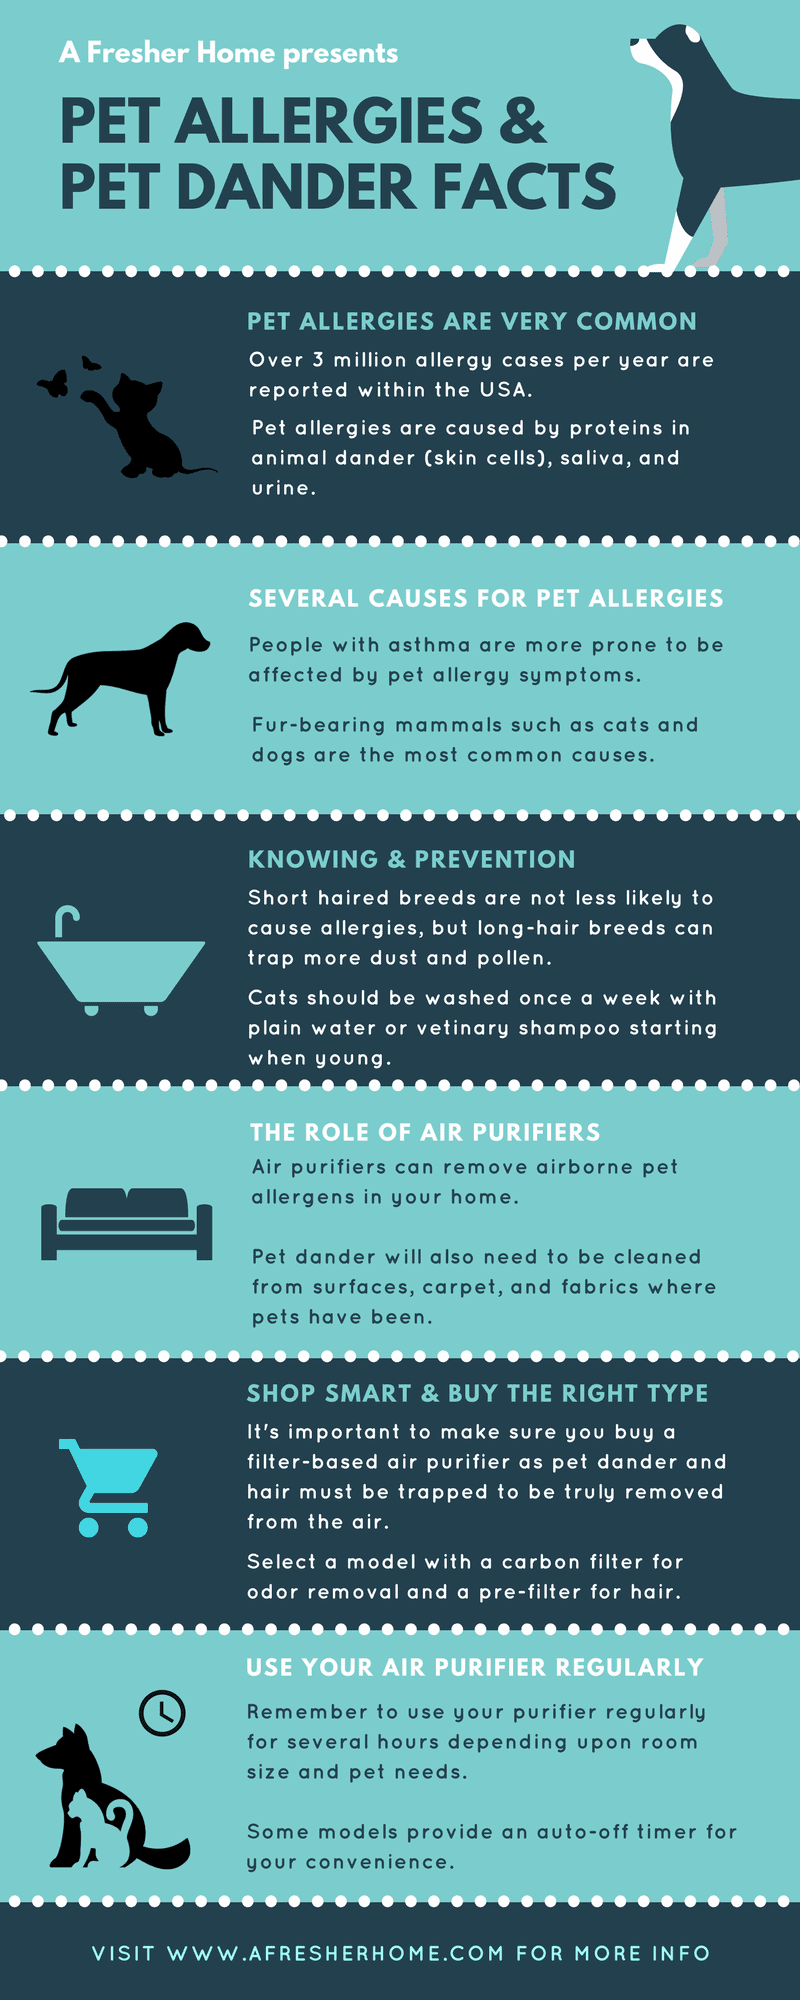 Infographic image for pet dander and air purifier information